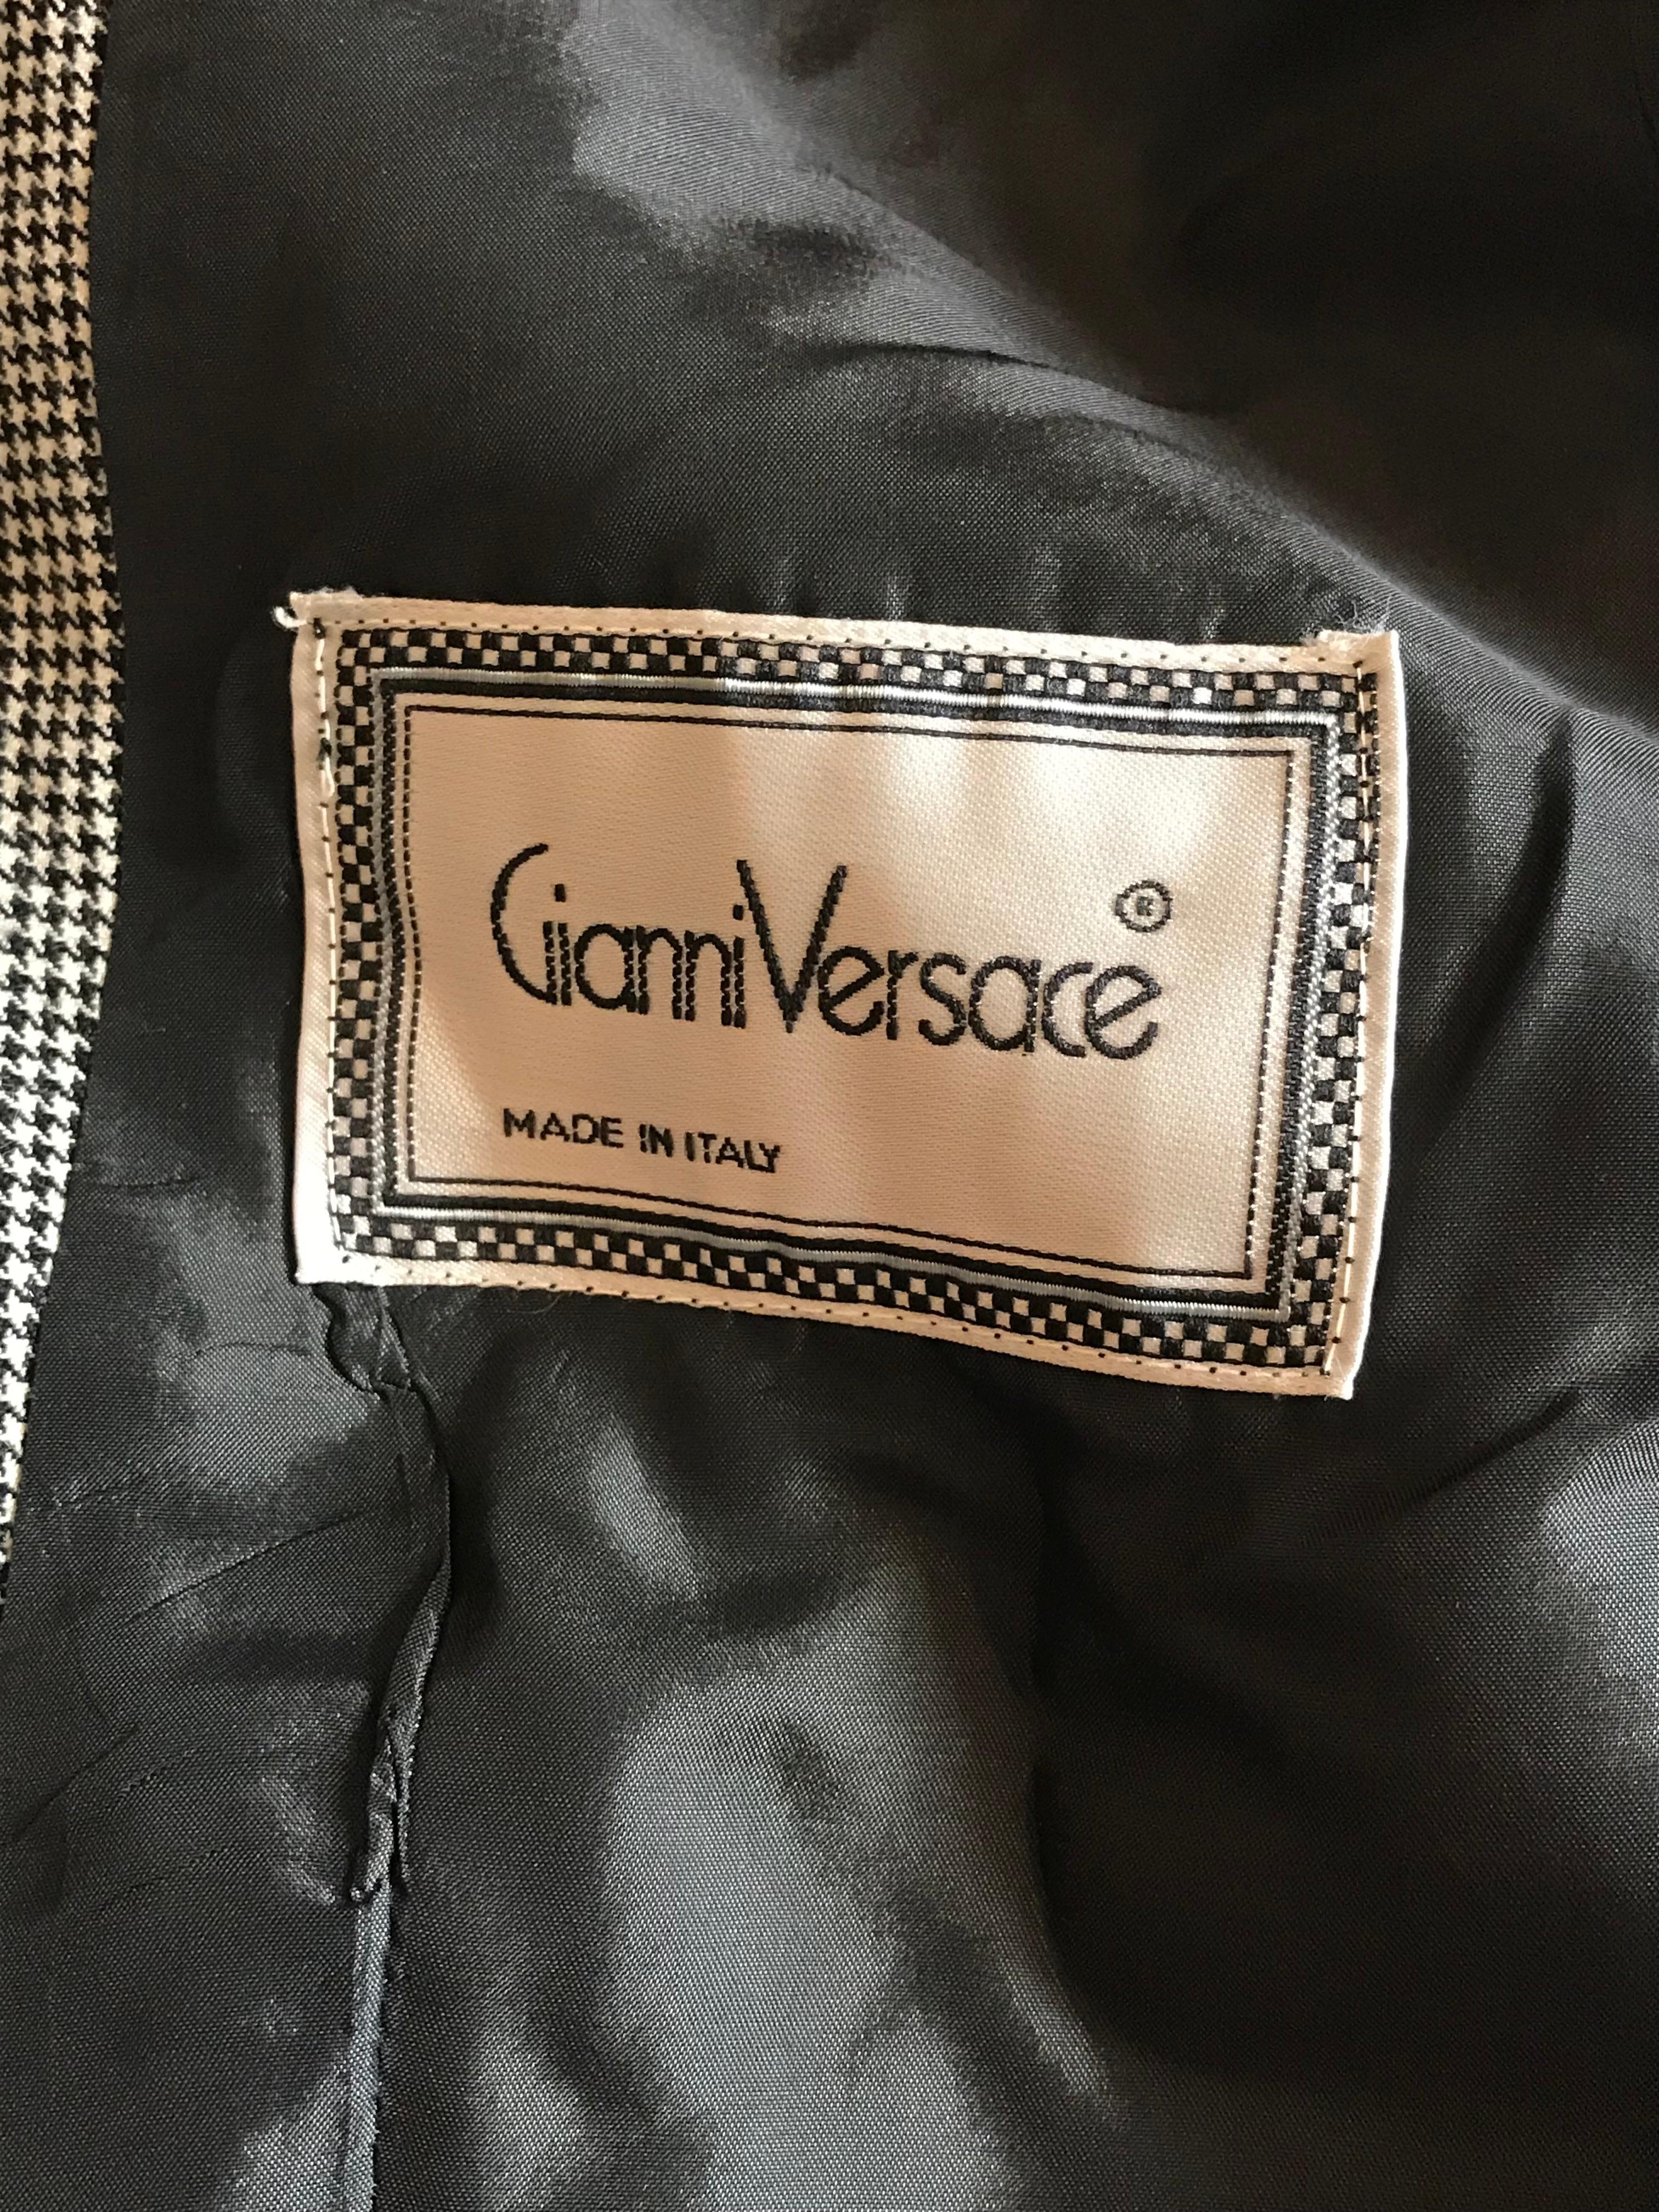 Gianni Versace 1990s Purple Flower Black White Houndstooth Skirt Suit In Good Condition For Sale In San Francisco, CA